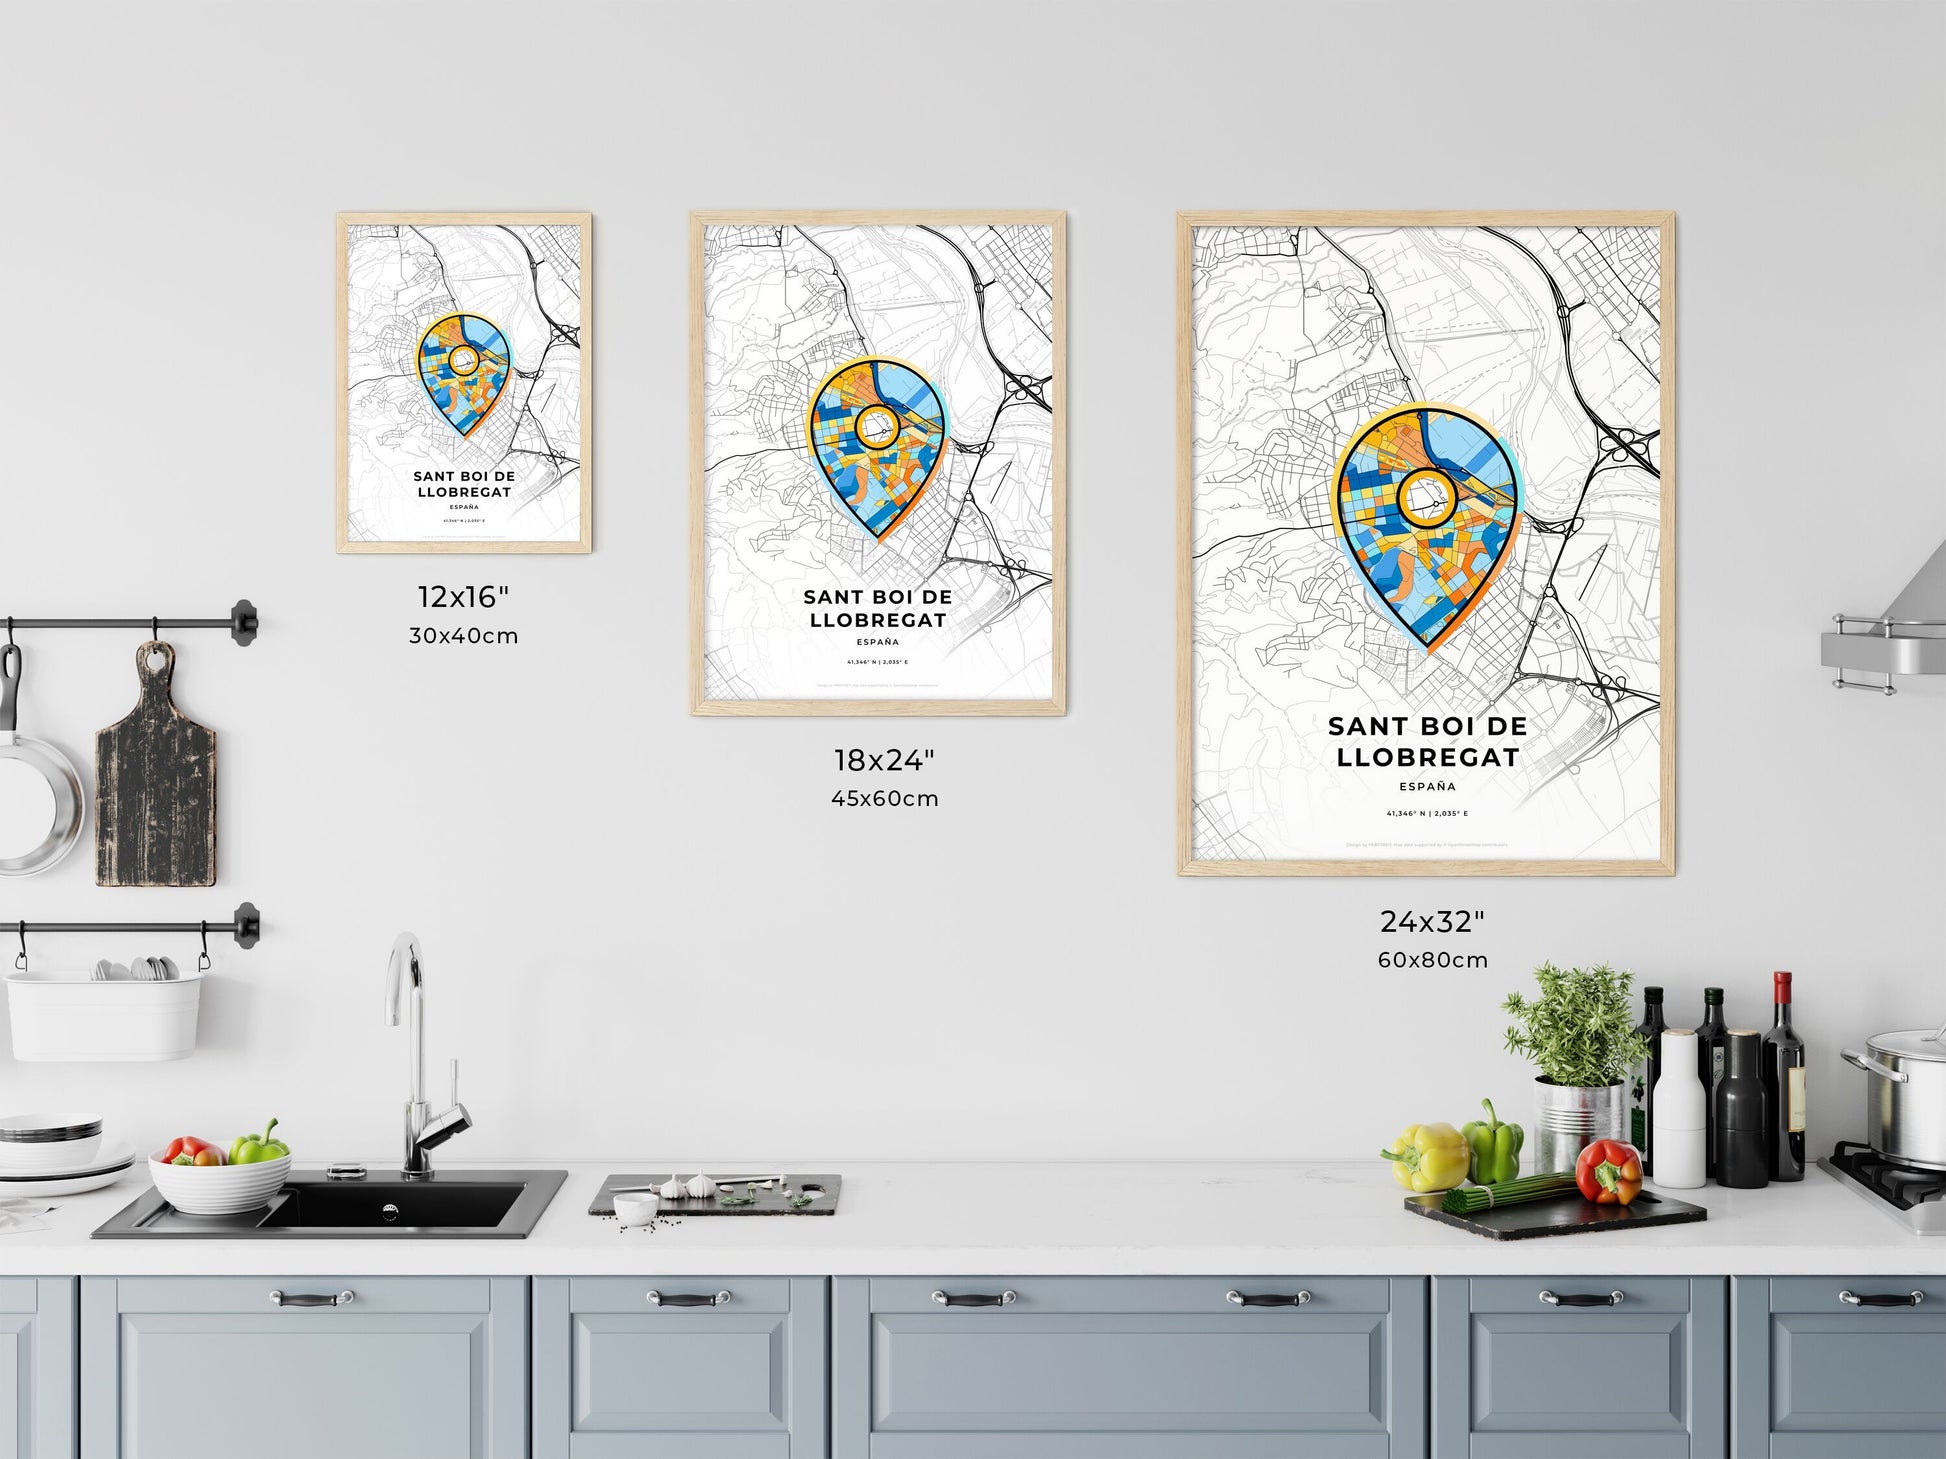 SANT BOI DE LLOBREGAT SPAIN minimal art map with a colorful icon. Where it all began, Couple map gift.